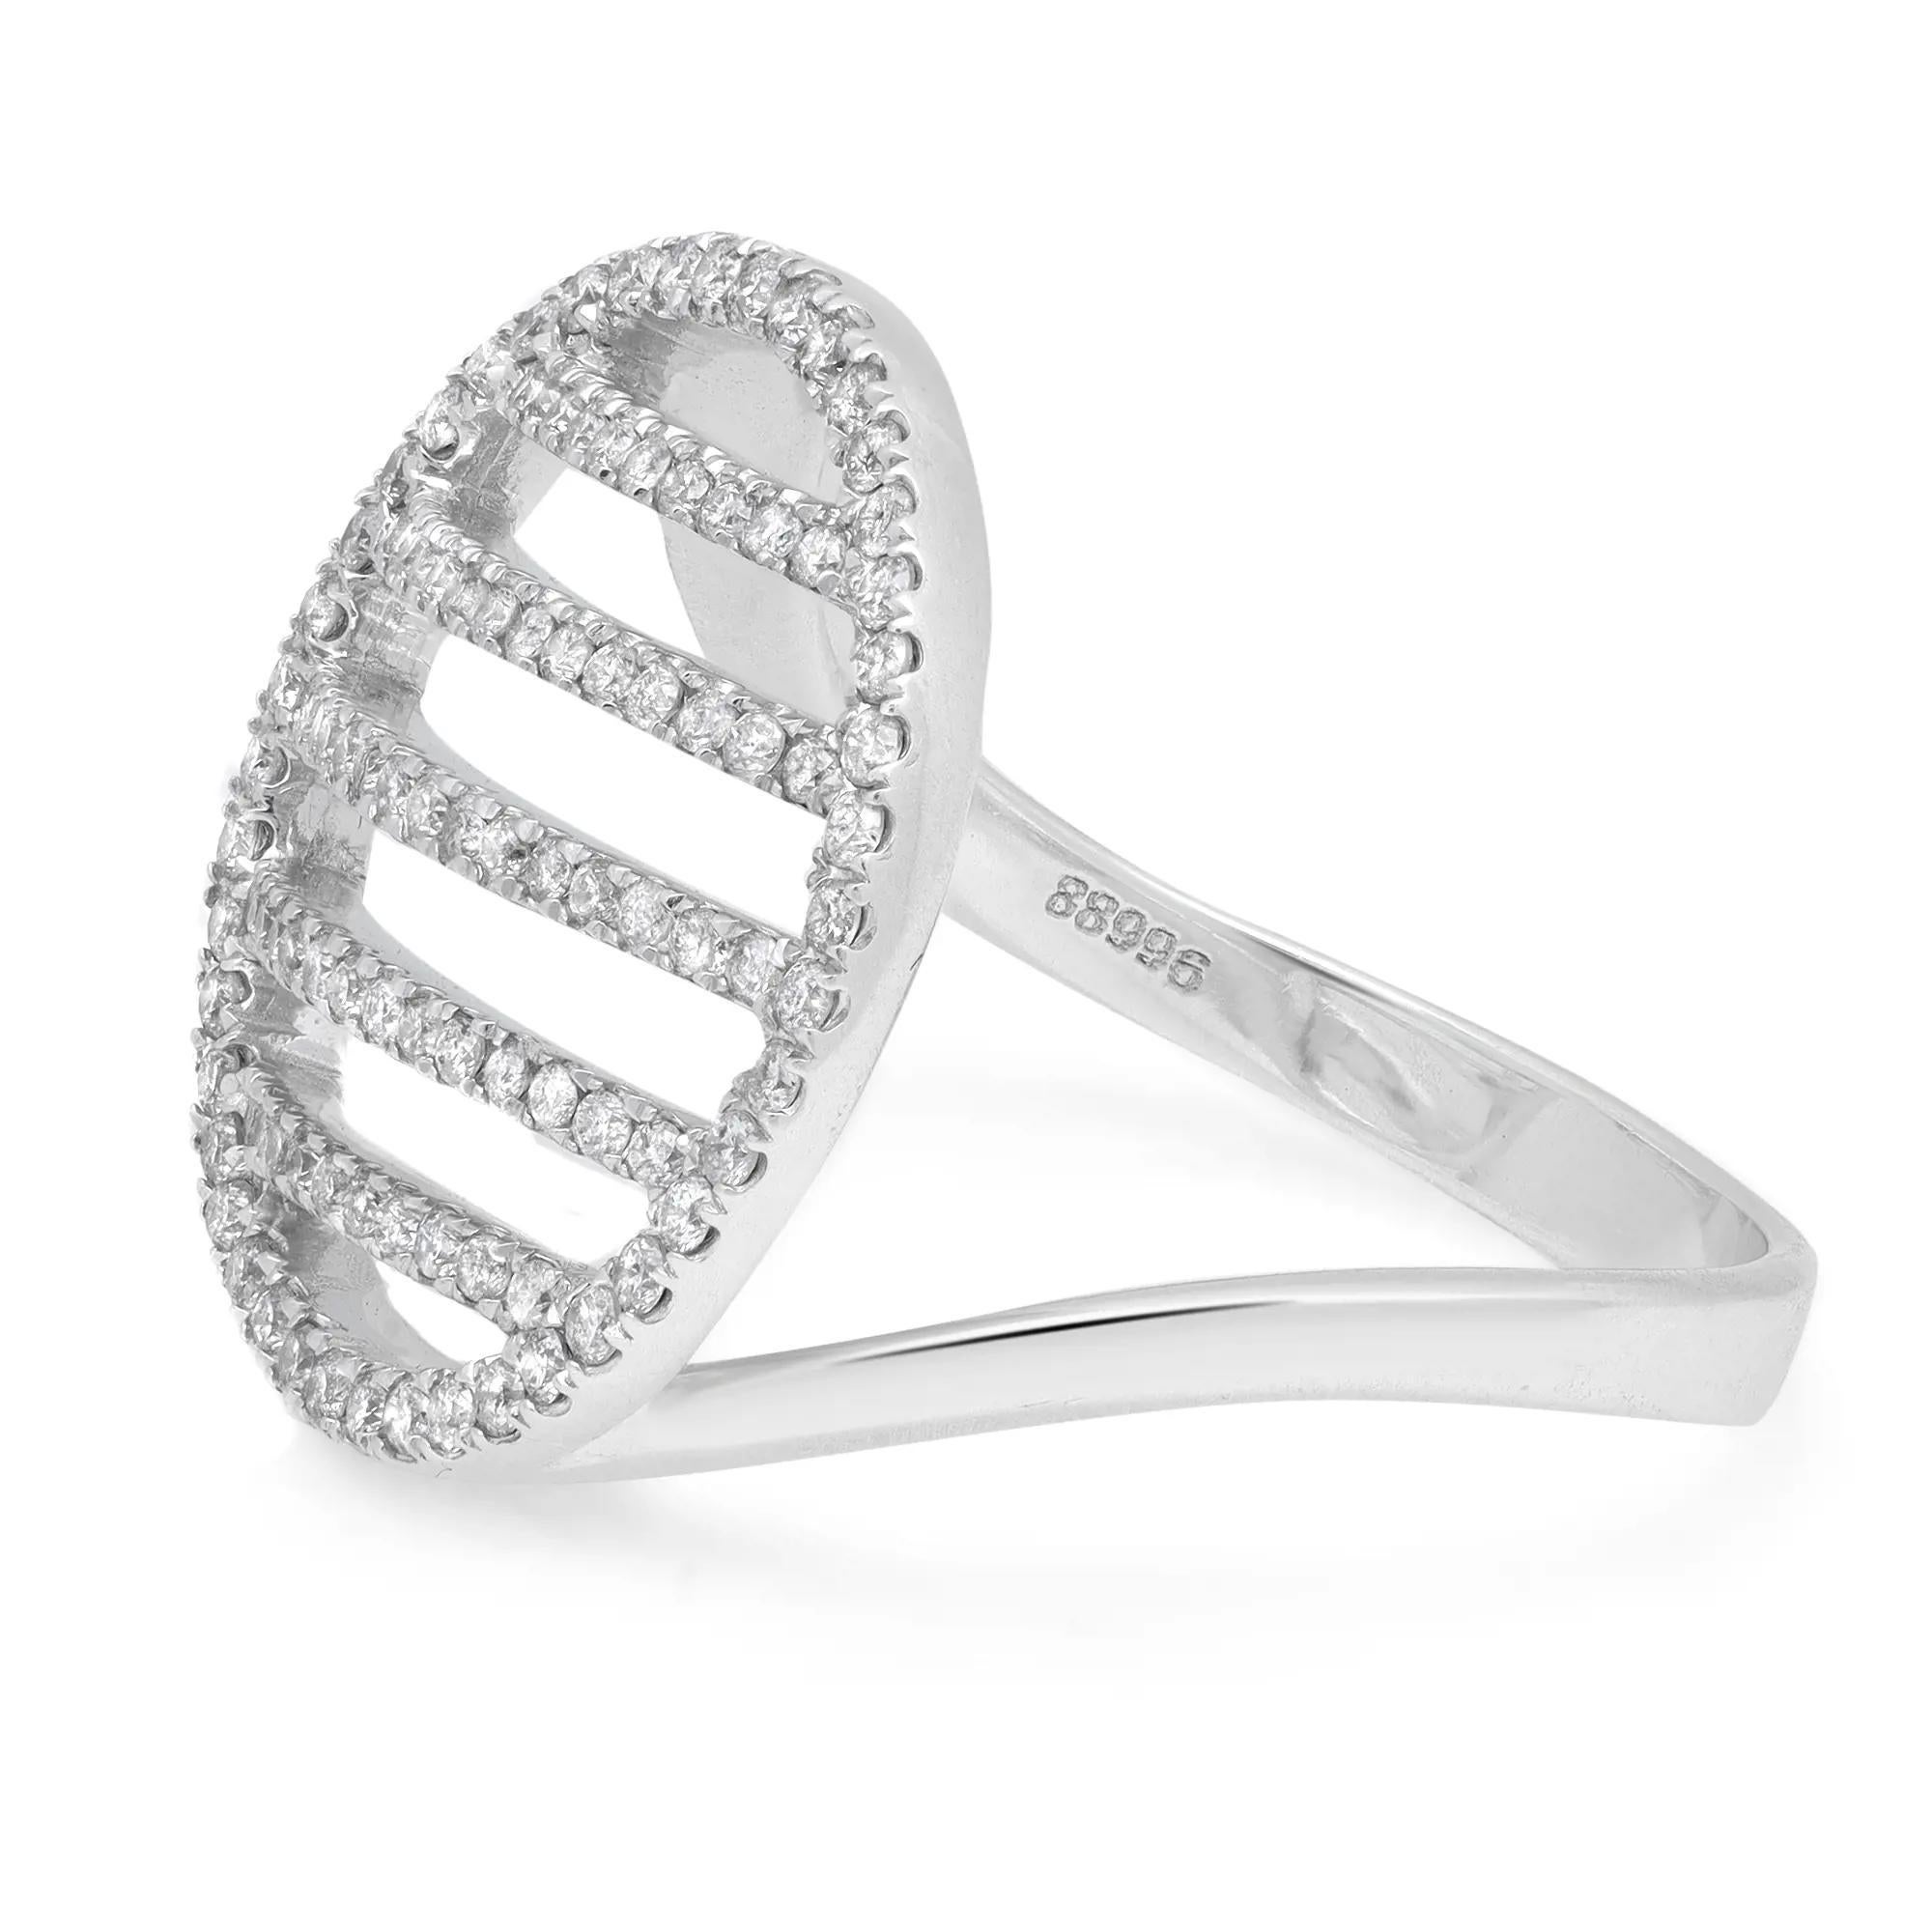 Rachel Koen 0.70cttw Round Cut Diamond Cocktail Ring 14k White Gold In New Condition For Sale In New York, NY